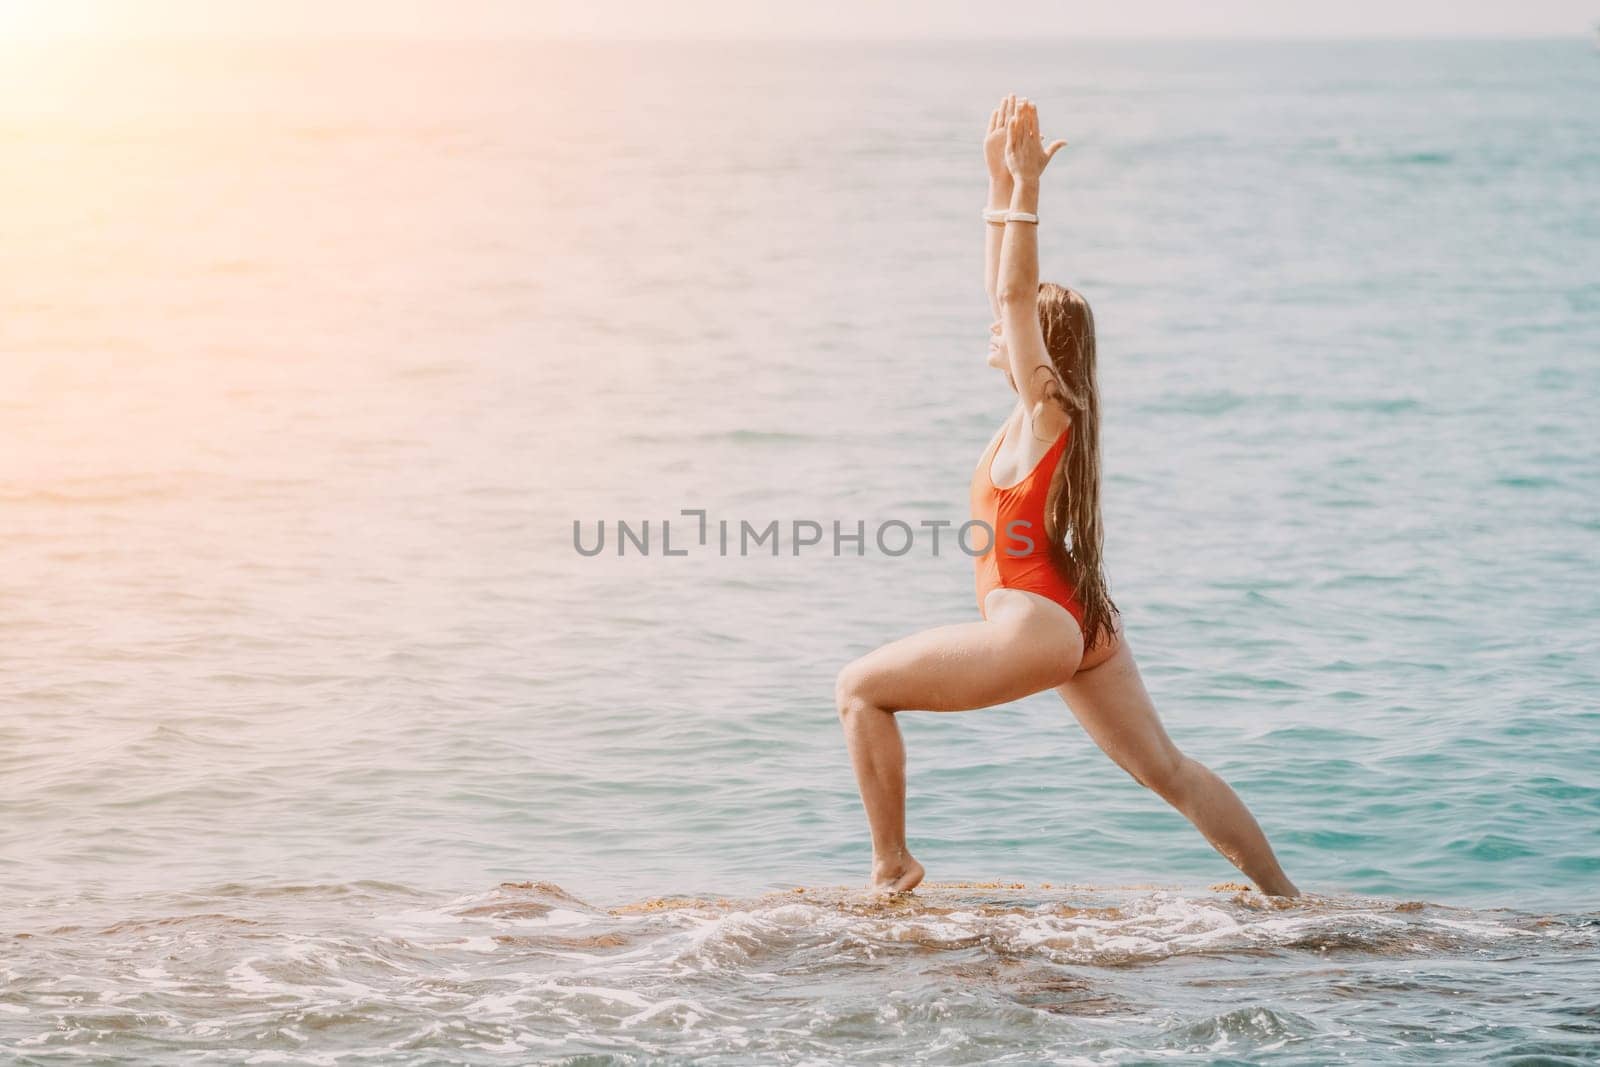 Woman sea yoga. Happy woman meditating in yoga pose on the beach, ocean and rock mountains. Motivation and inspirational fit and exercising. Healthy lifestyle outdoors in nature, fitness concept. by panophotograph